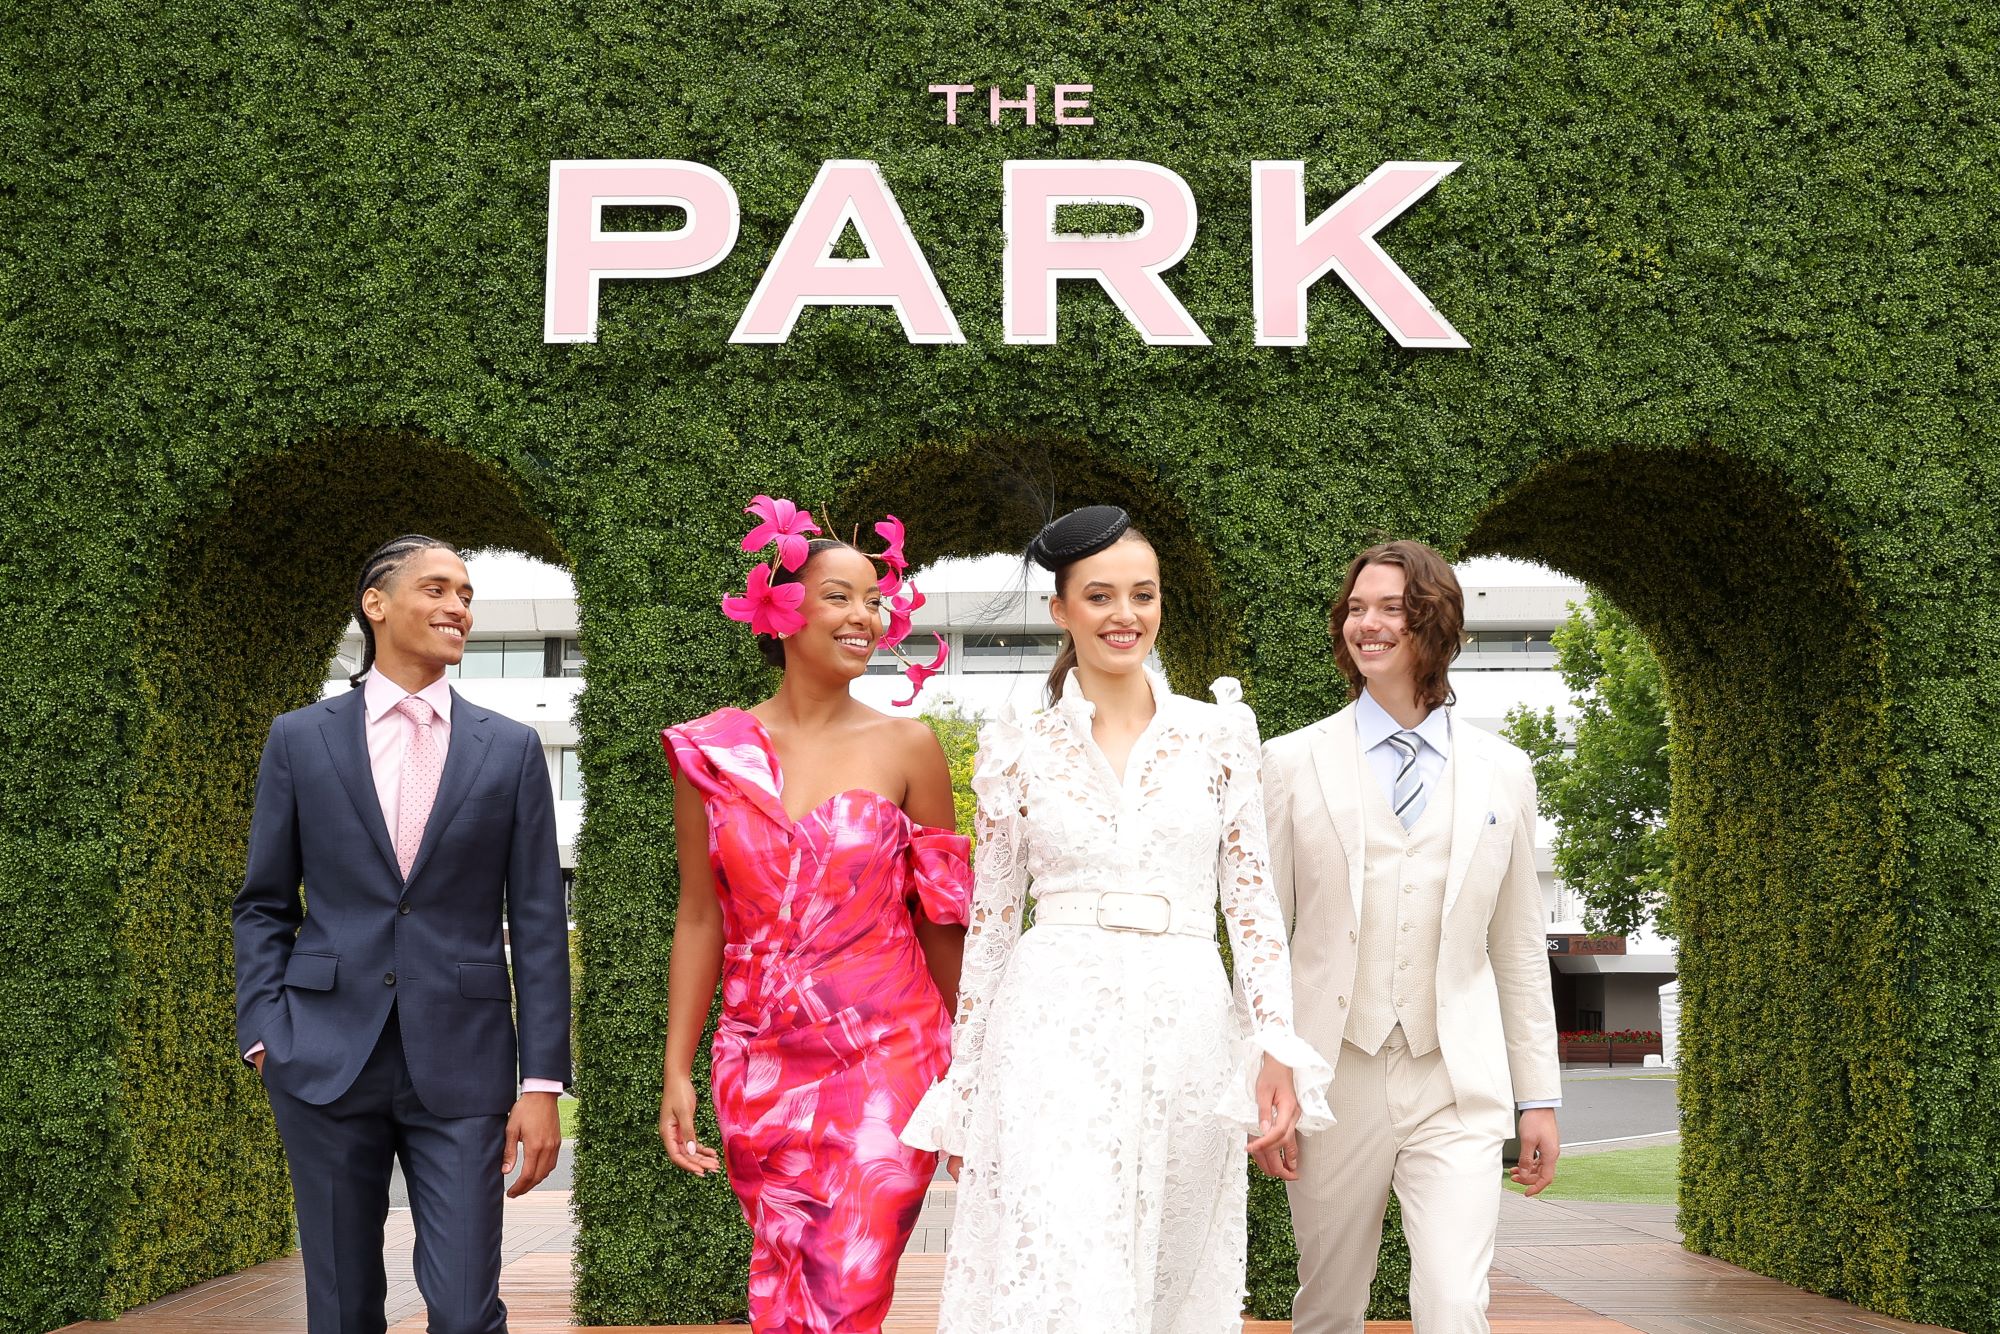 The Park unveiled ahead of the 2023 Melbourne Cup Carnival